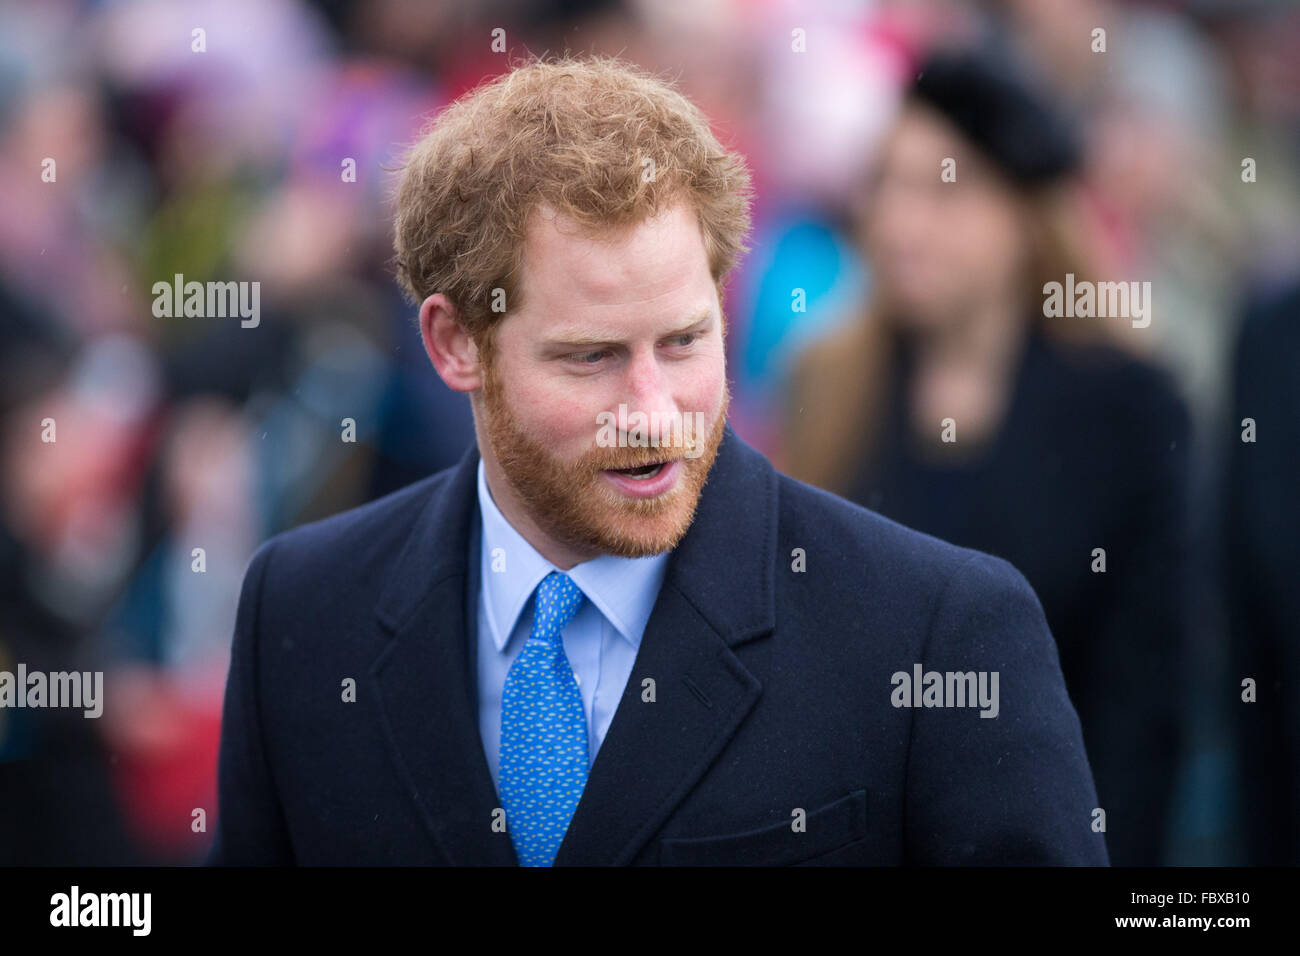 PIC BY GEOFF ROBINSON PHOTOGRAPHY 07976 880732.    Pic shows  Prince Harry at Sandringham Church on December 25, 2015 in King's Lynn, Norfolk, for the Christmas Day Service.   Members of the Royal Family have attended the Christmas Day service at church on the Sandringham estate. Led by the Queen, who arrived in a Bentley, the royals made their way from Sandringham House to St Mary Magdalene Church for the traditional service. The other members of the family made the short journey on foot. Hundreds of well-wishers had gathered in the rain to catch a glimpse of the monarch and other senior memb Stock Photo